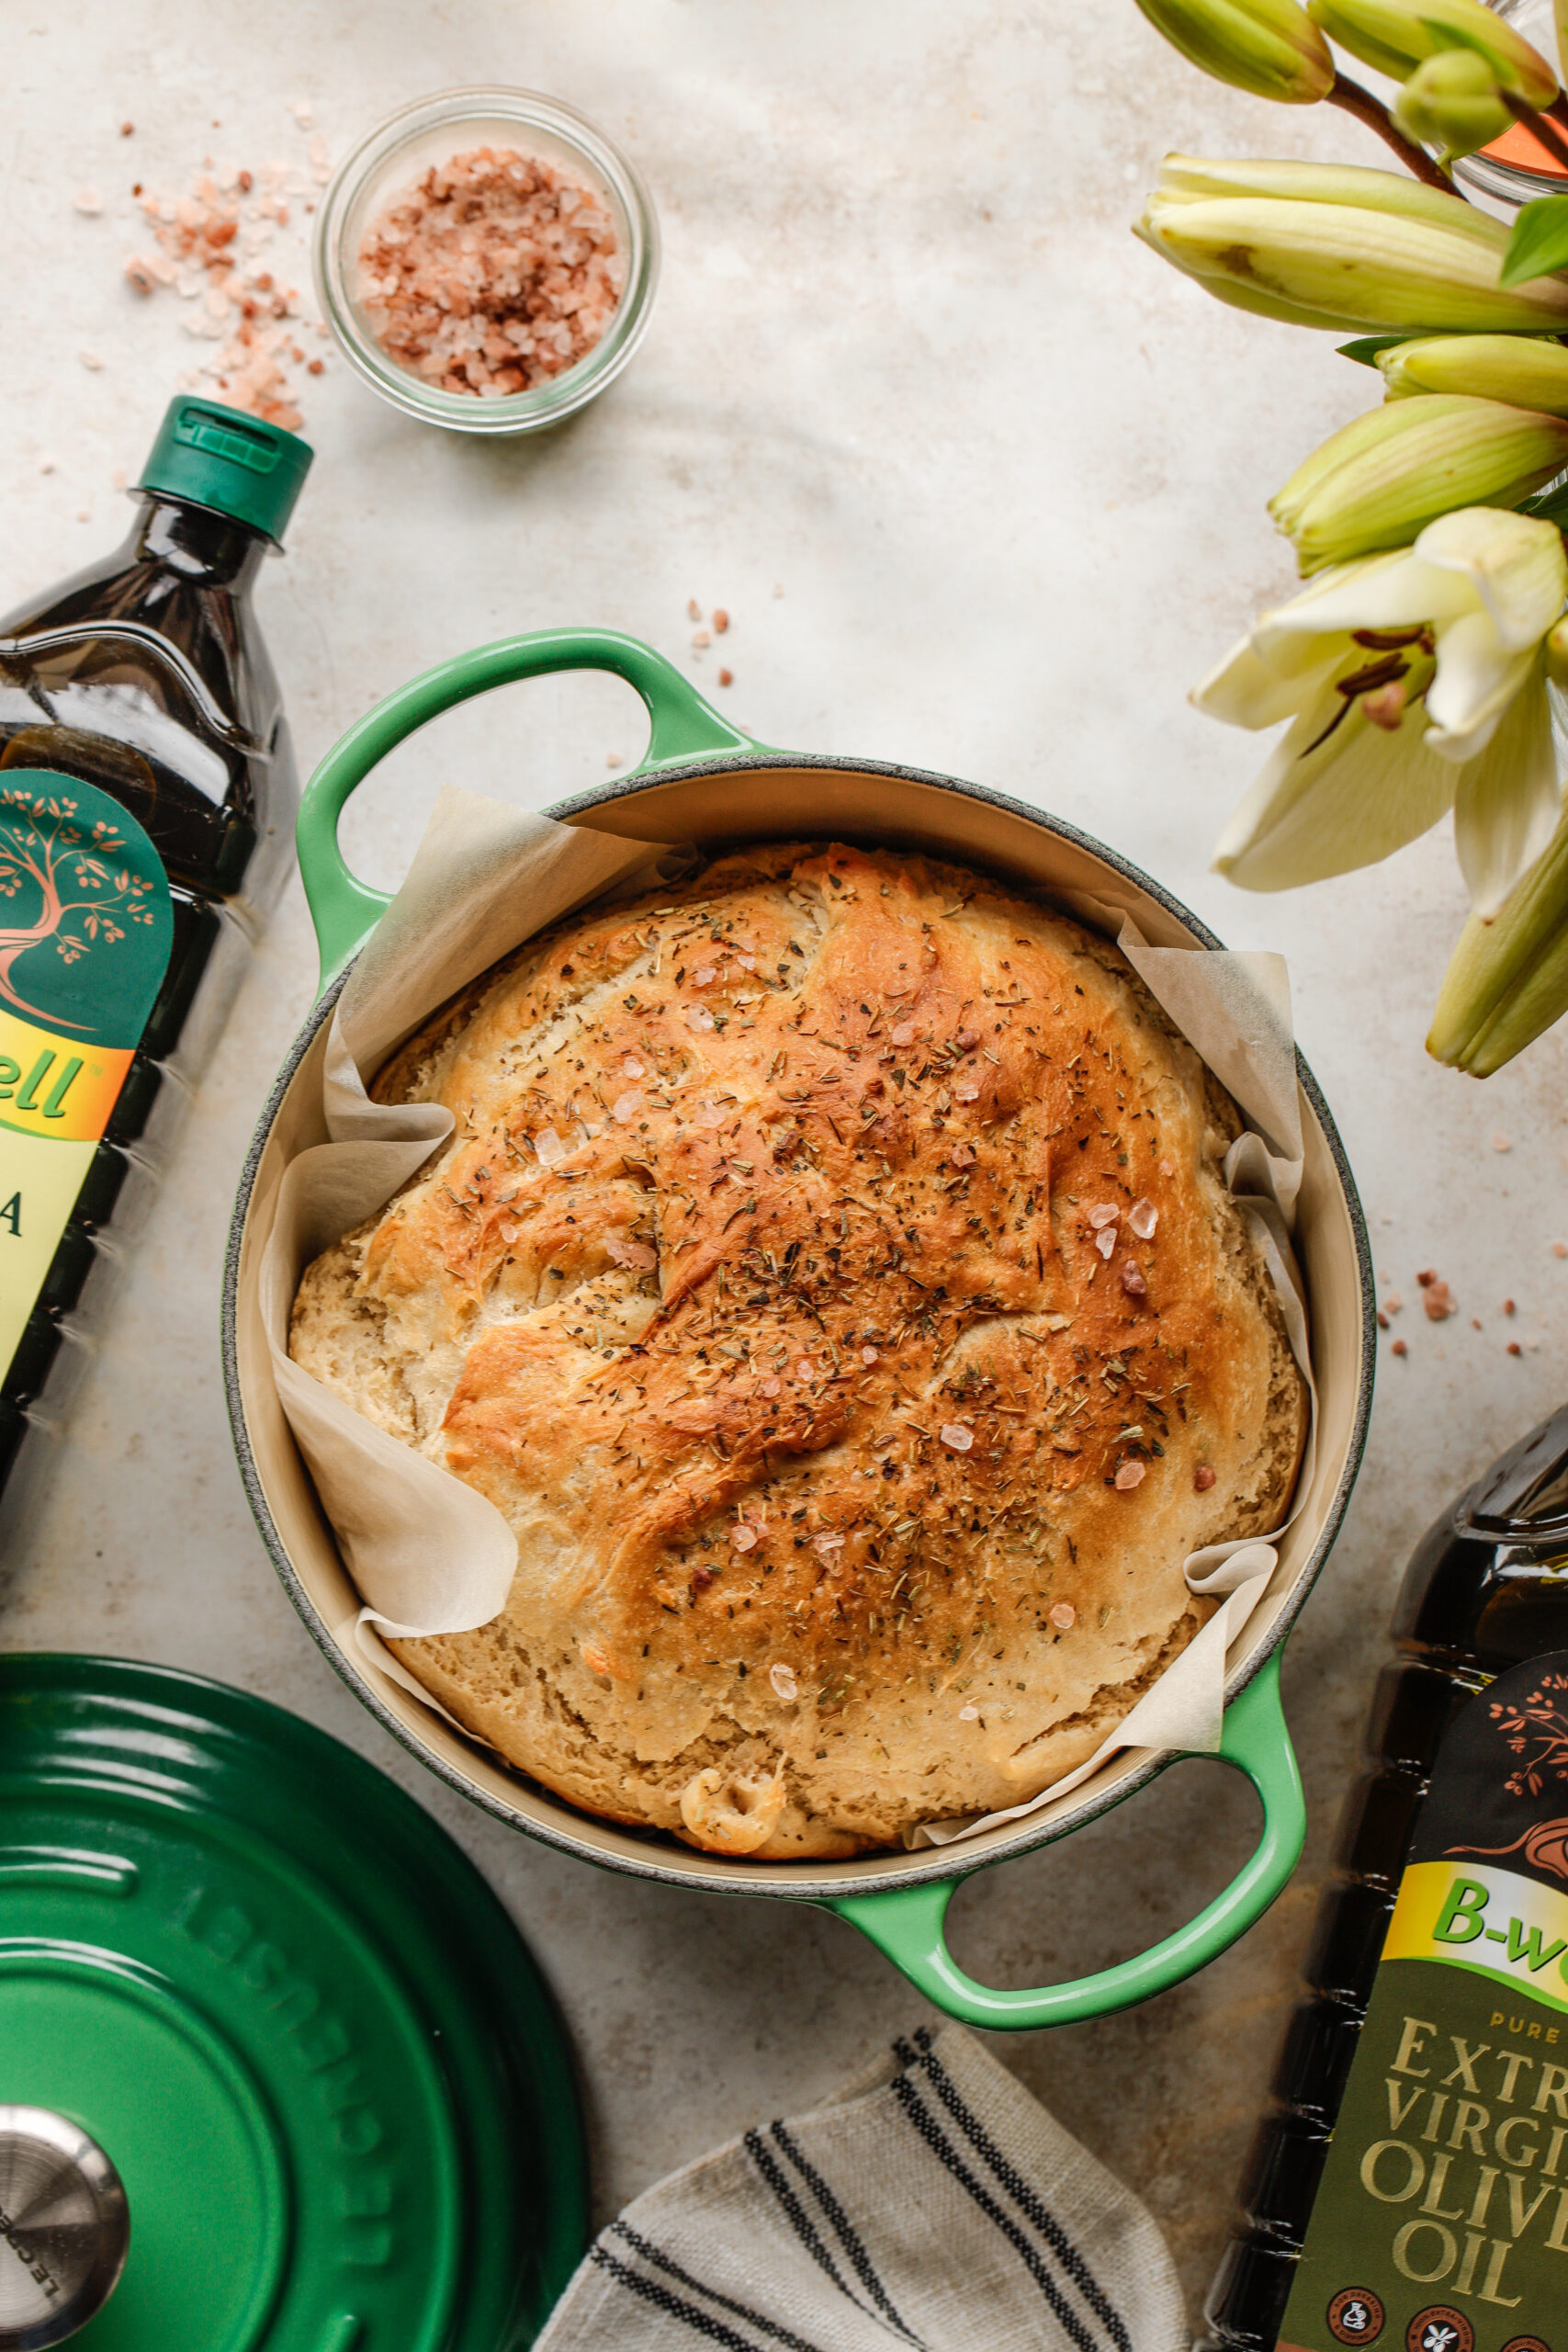 Rosemary Olive oil loaf